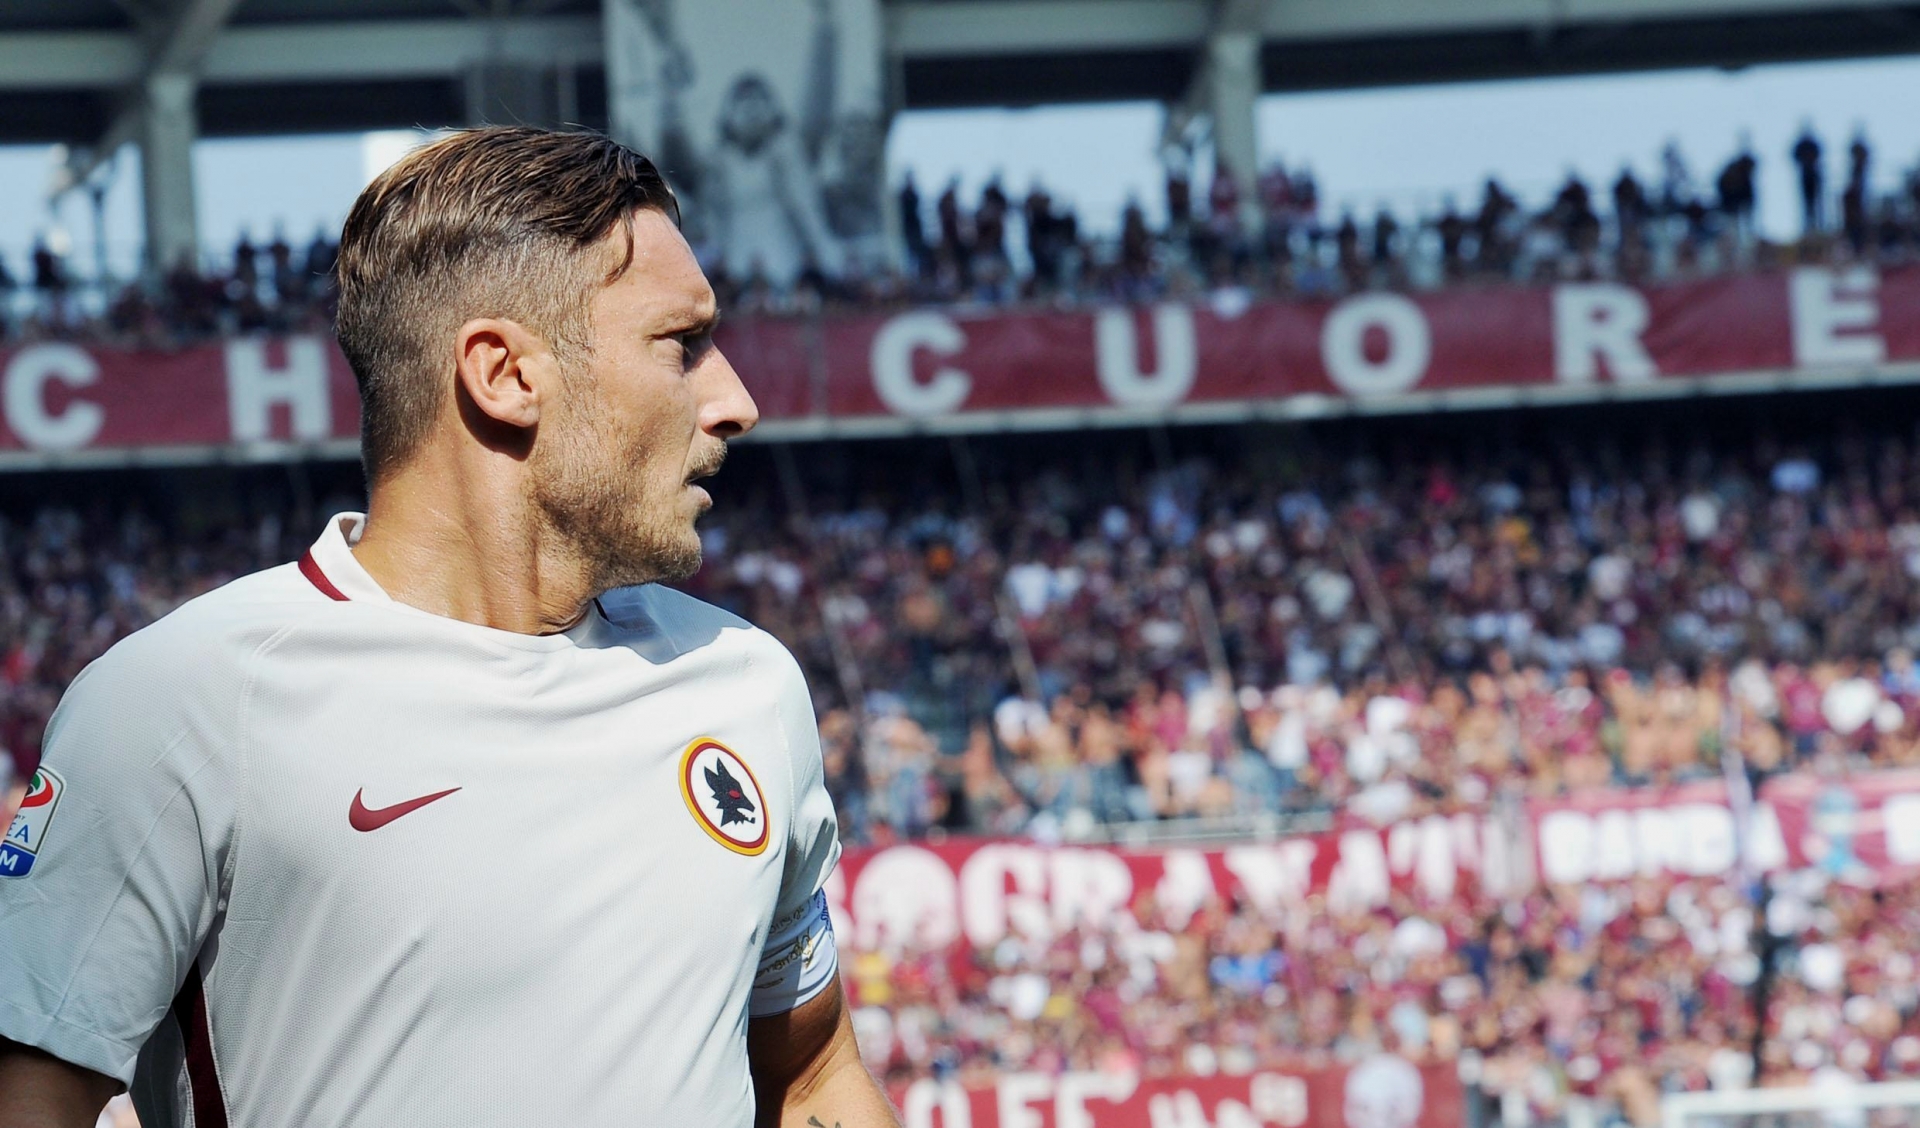 Roma's Francesco Totti walks on the pitch during a Serie A soccer match between Roma and Torino at the Turin Olympic stadium, Italy, Sunday, Sept. 25, 2016. (Alessandro Di Marco/ANSA via AP) Italy Soccer Serie A